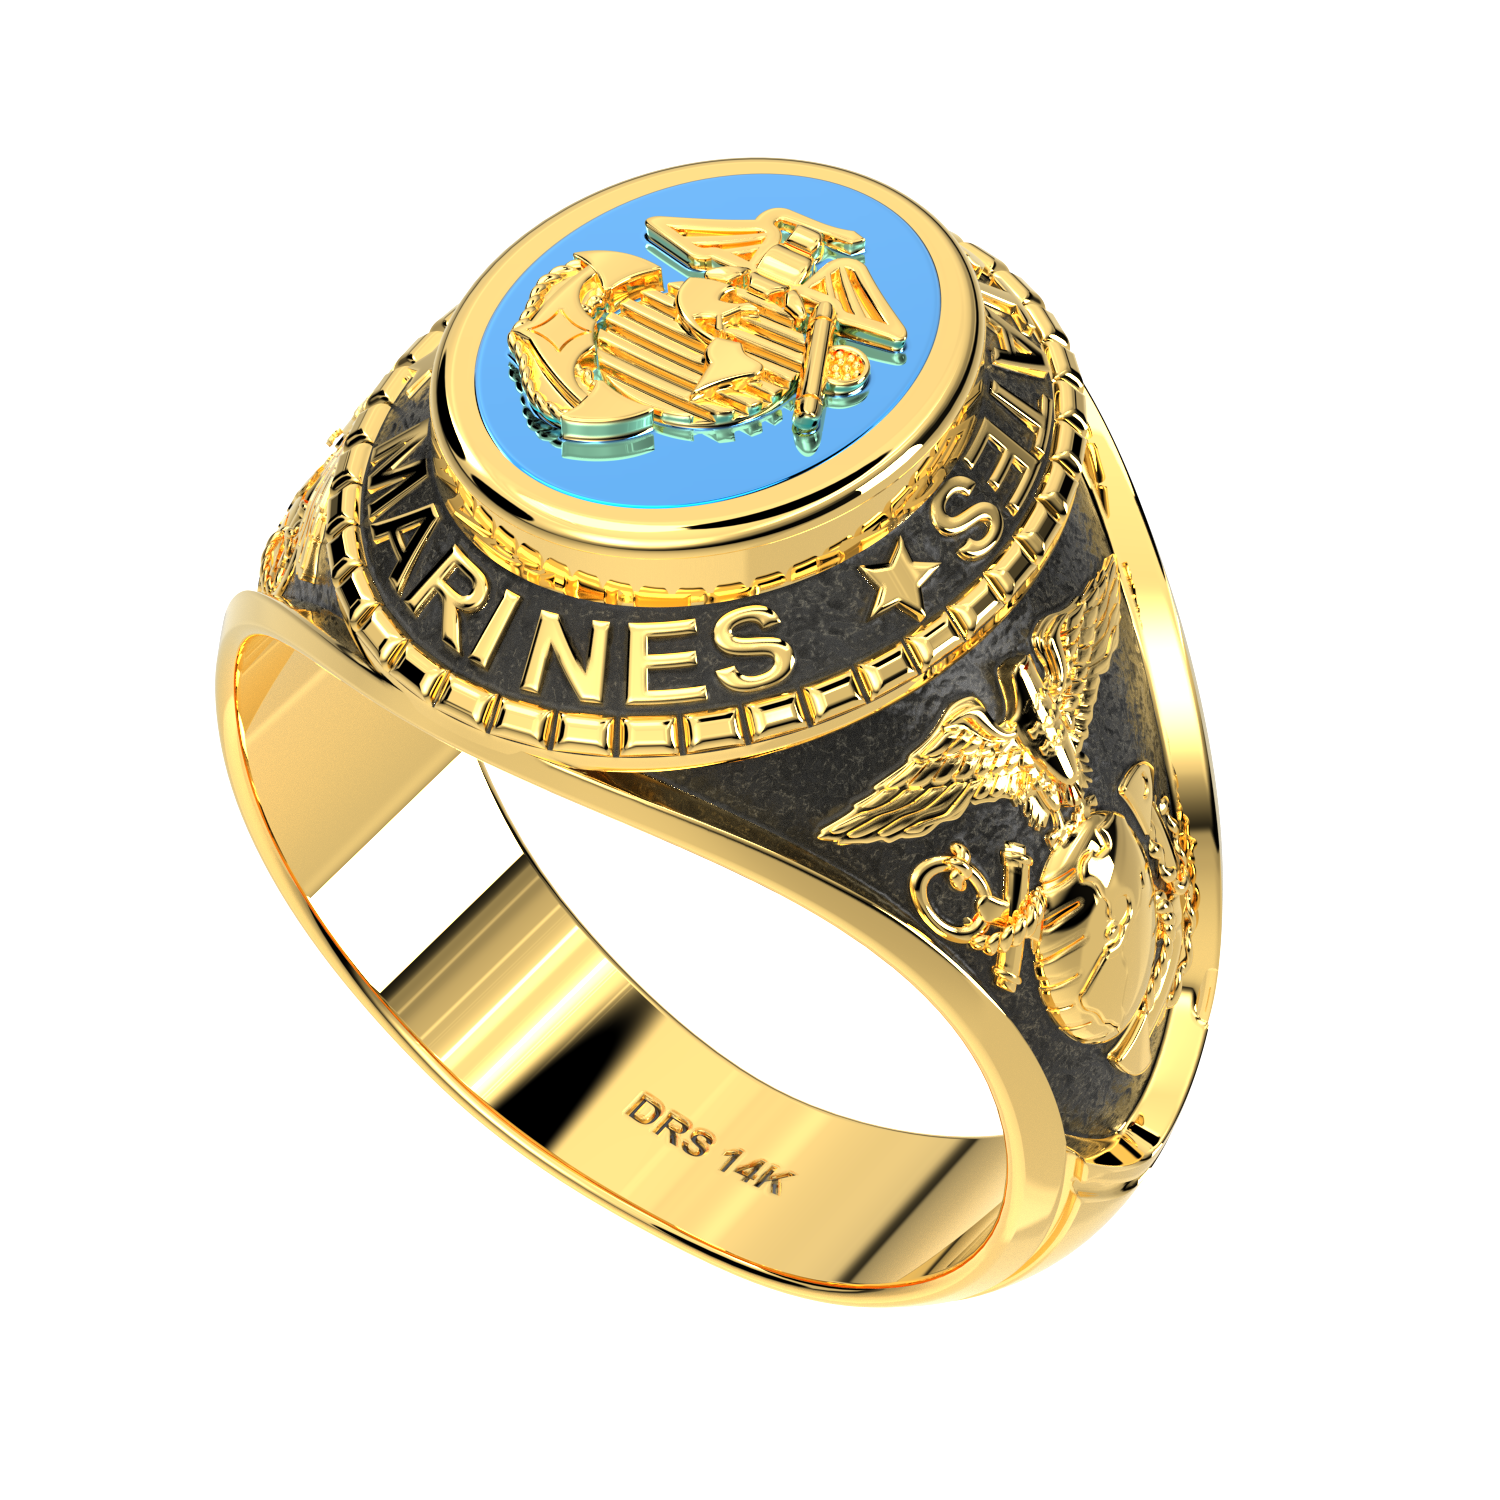 Engraved 22k Gold Ring Jewelry, K1856, All Size - Etsy